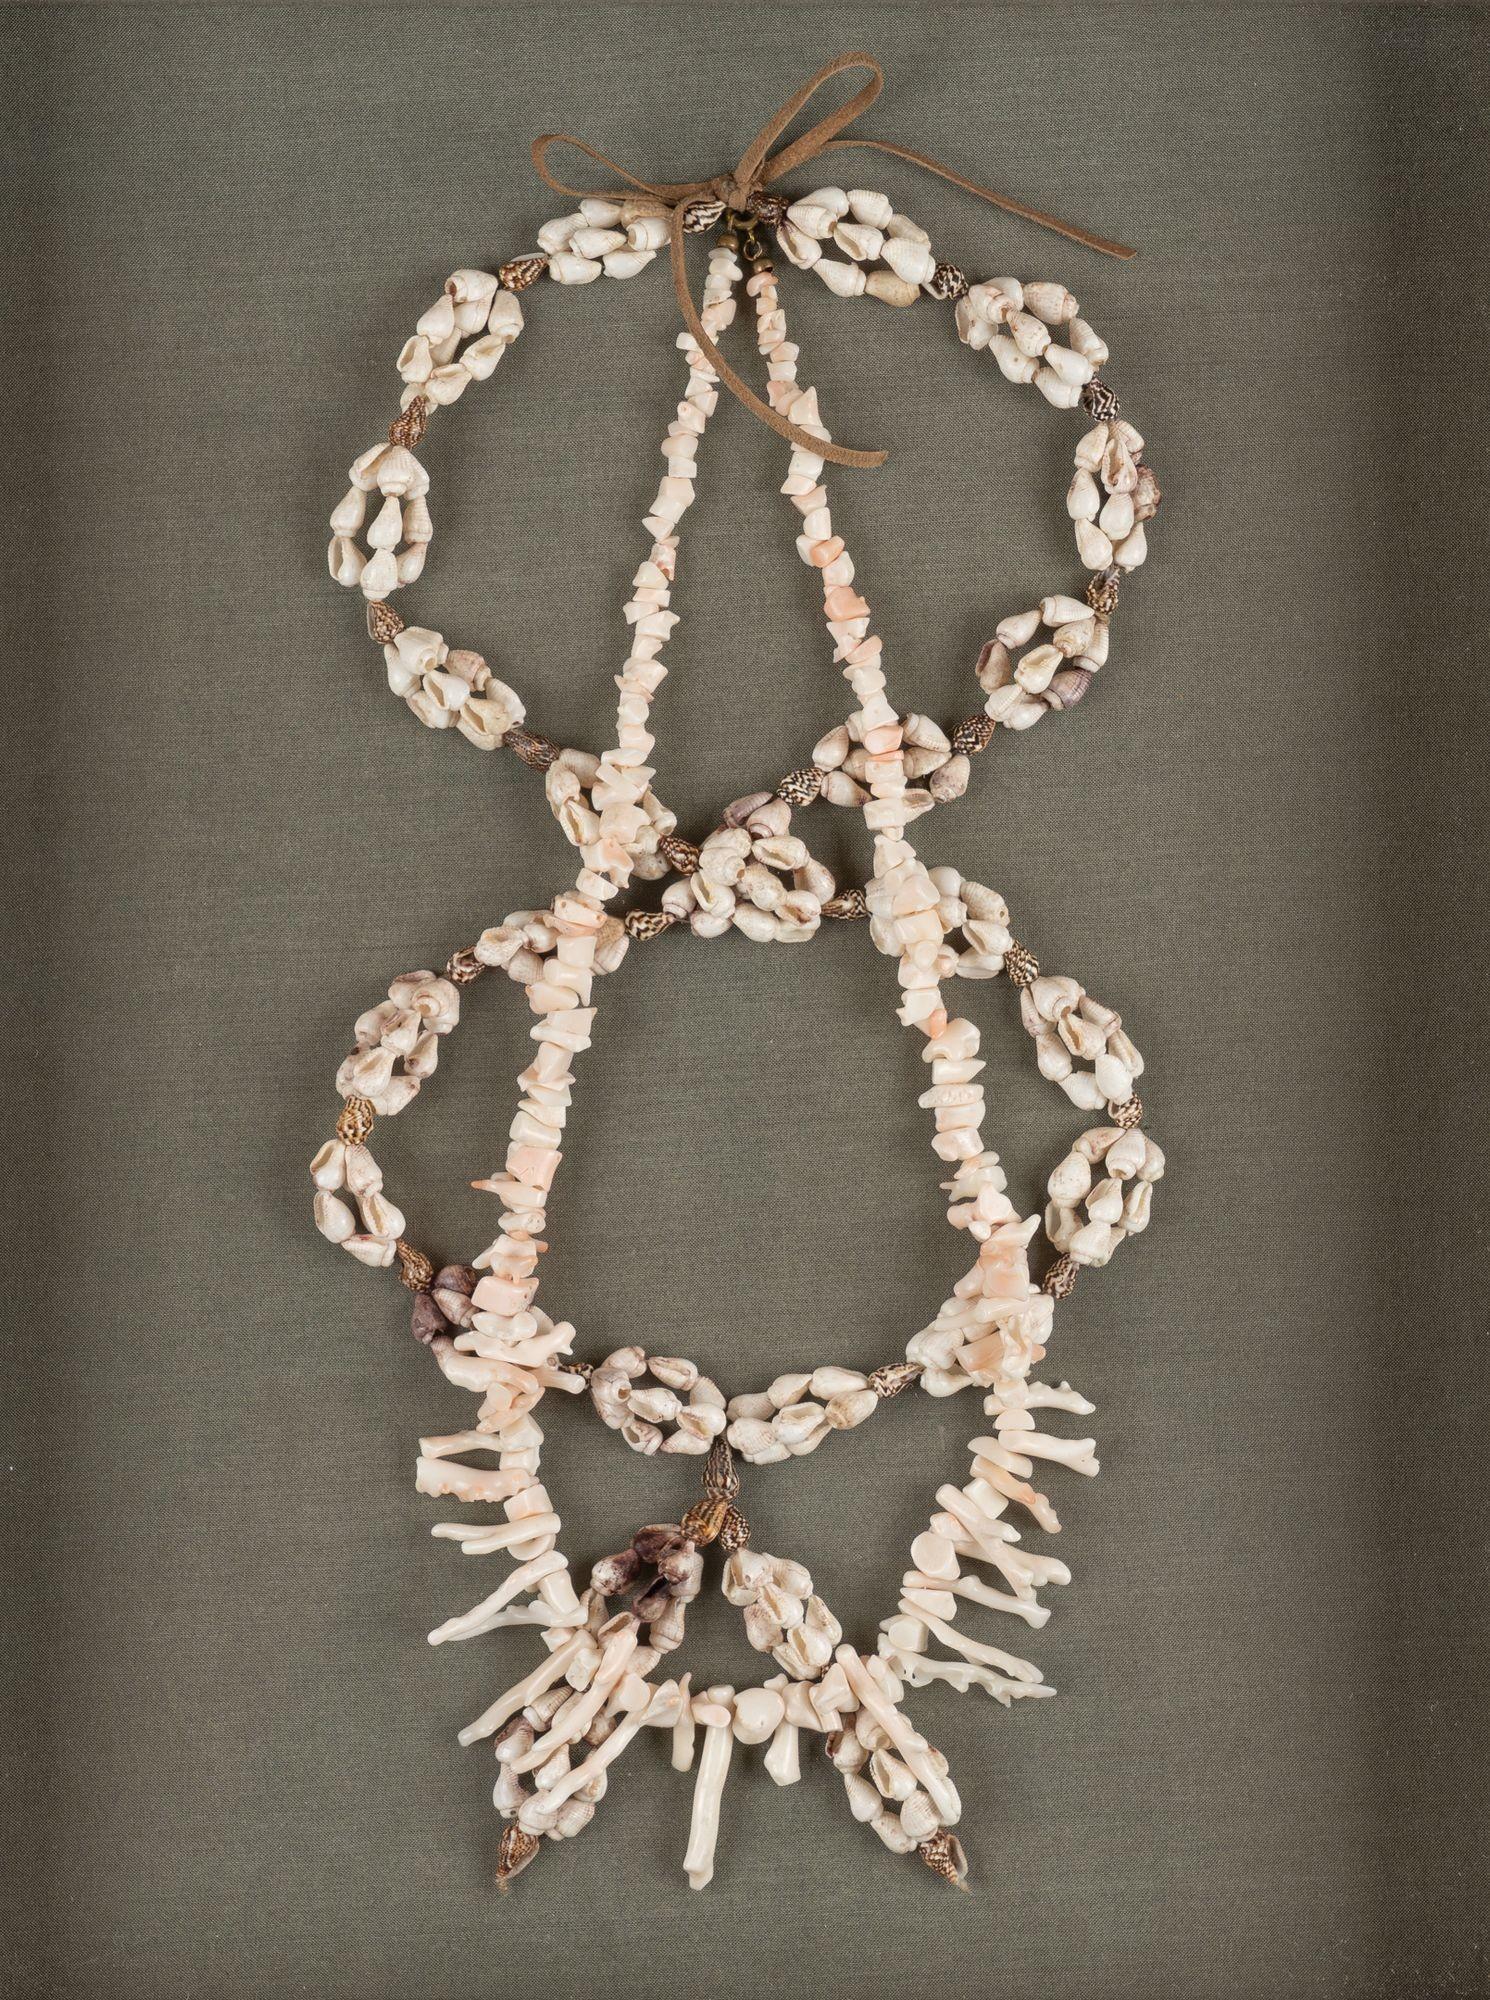 Threaded cluster of shell and white branch coral necklaces mounted on a green linen backing in a shadow box frame.